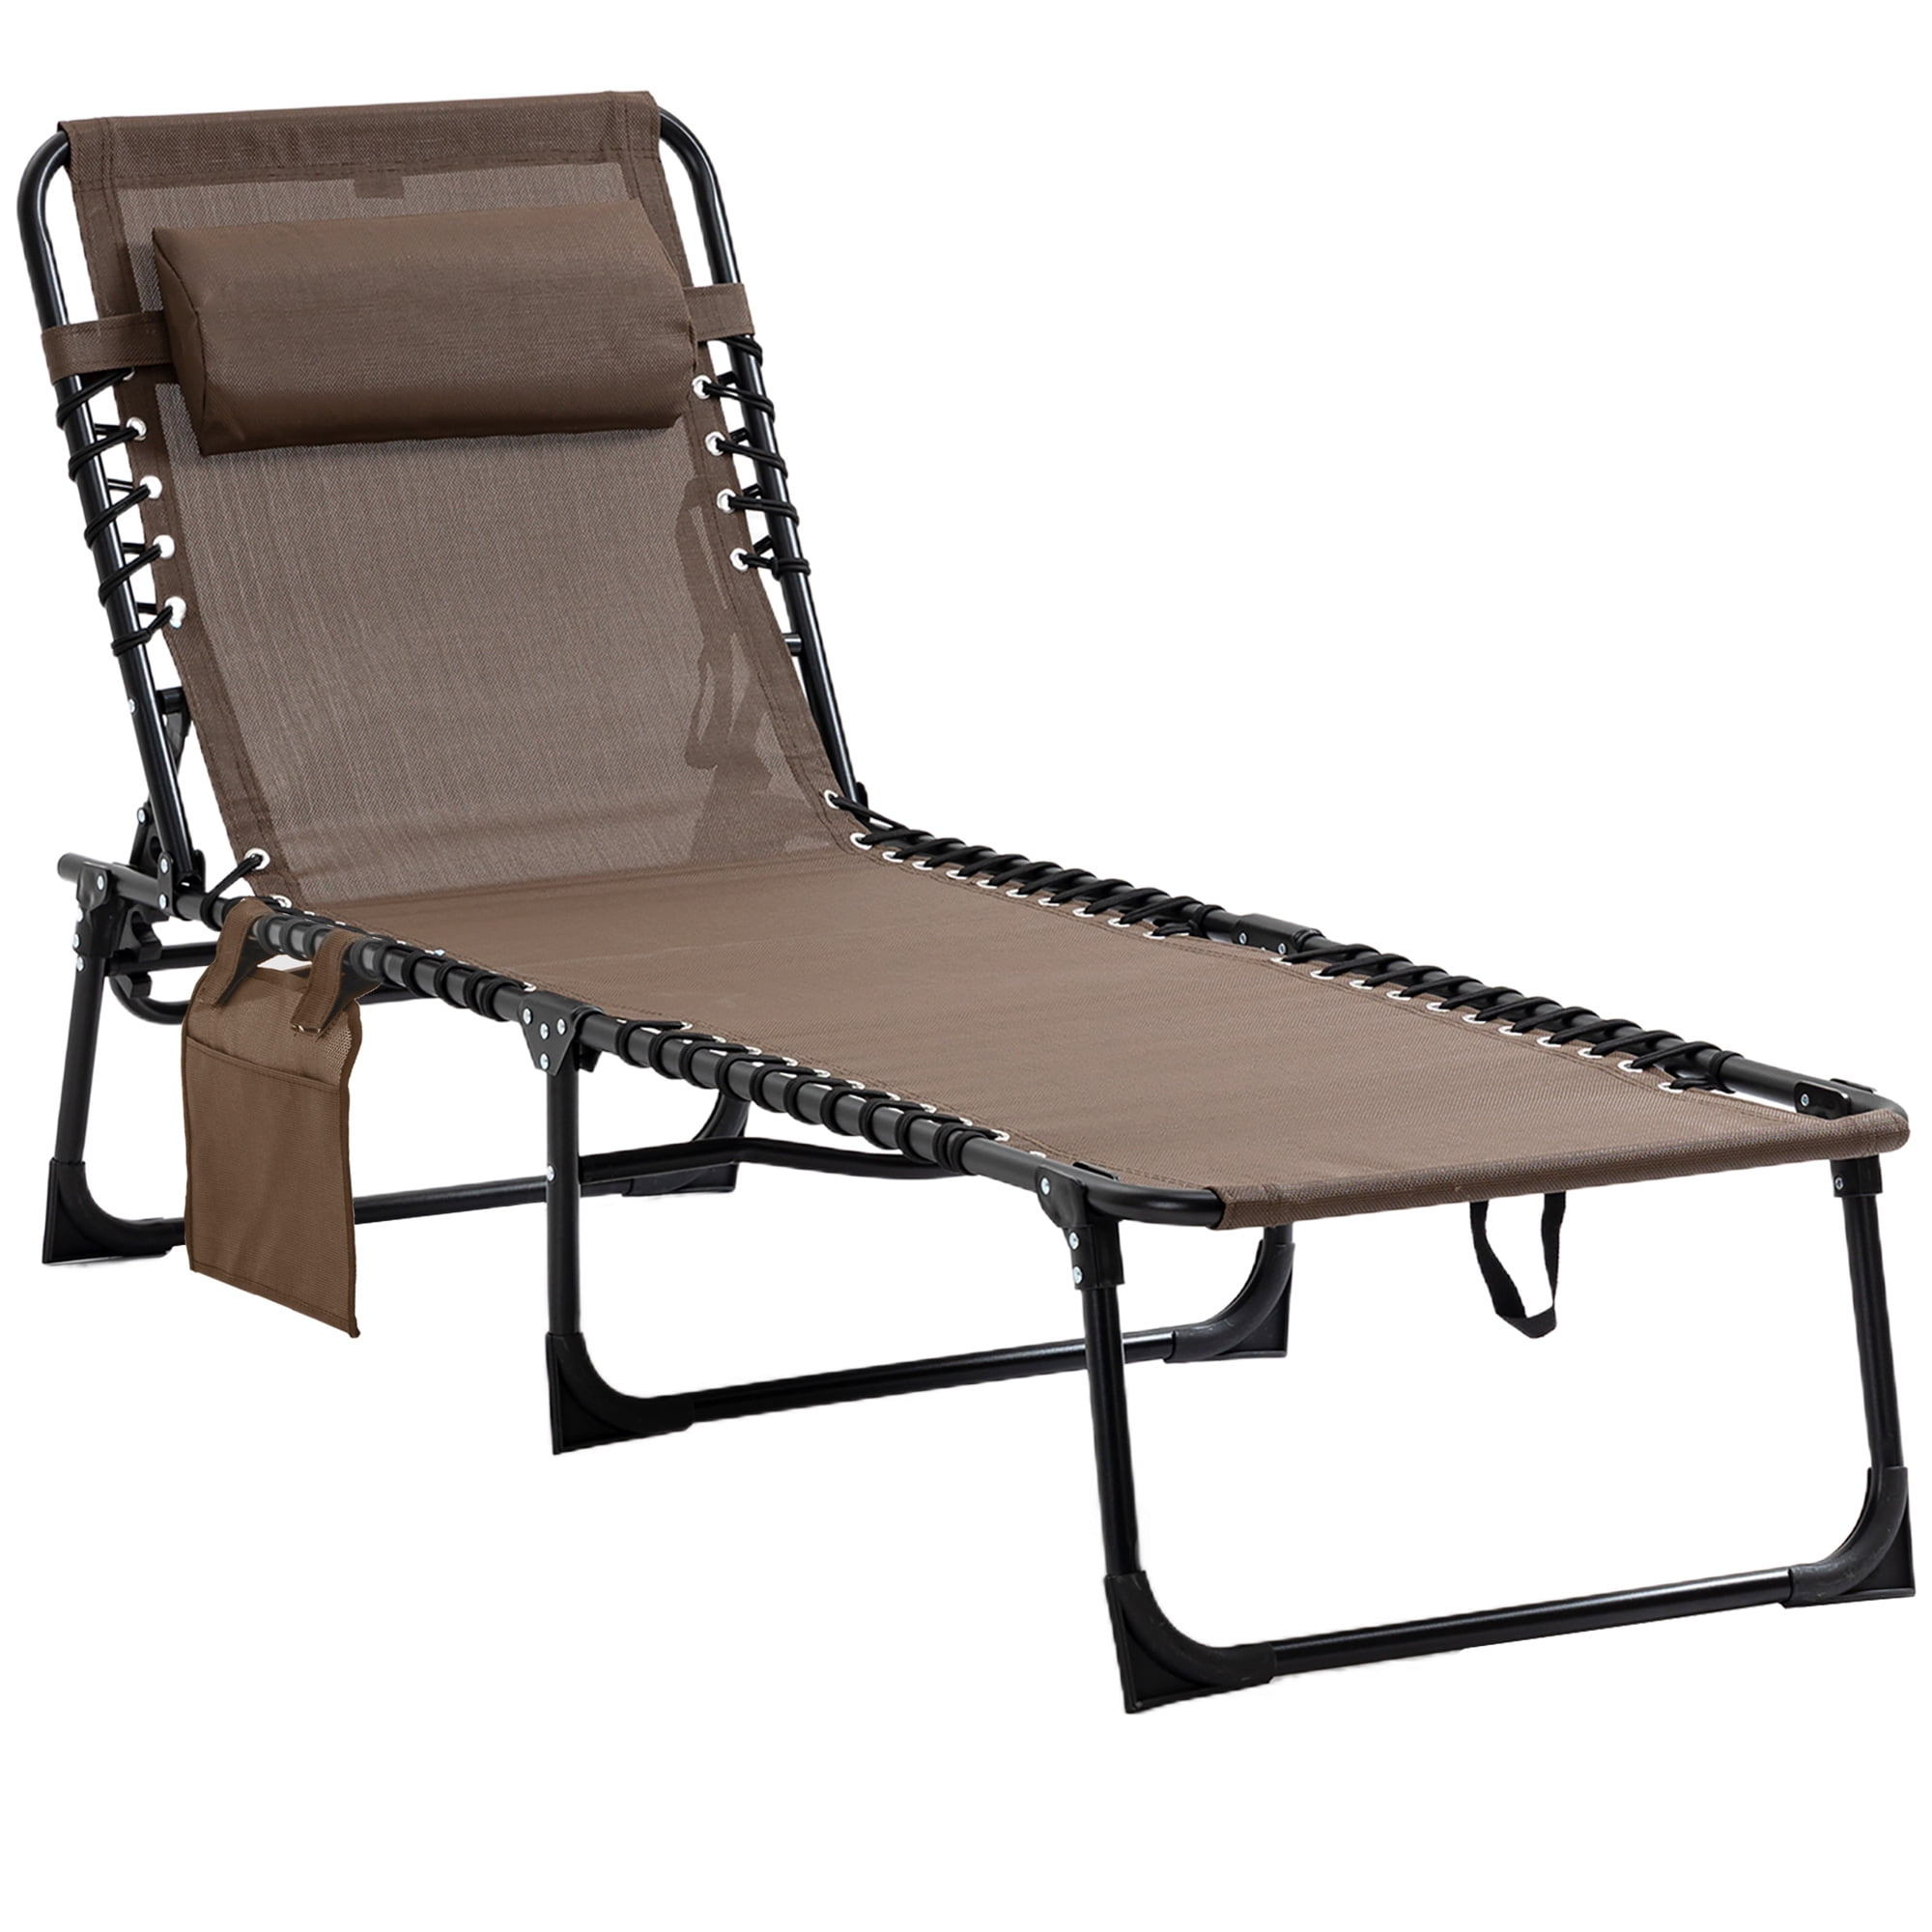  Camping Chair, Sun Loungers, Folding Chair, Office Nap Chairs, Pregnant  Women are Happy to Go Home with Elderly, Zero Gravity Chair,Outdoor  Reclining Chair : Patio, Lawn & Garden